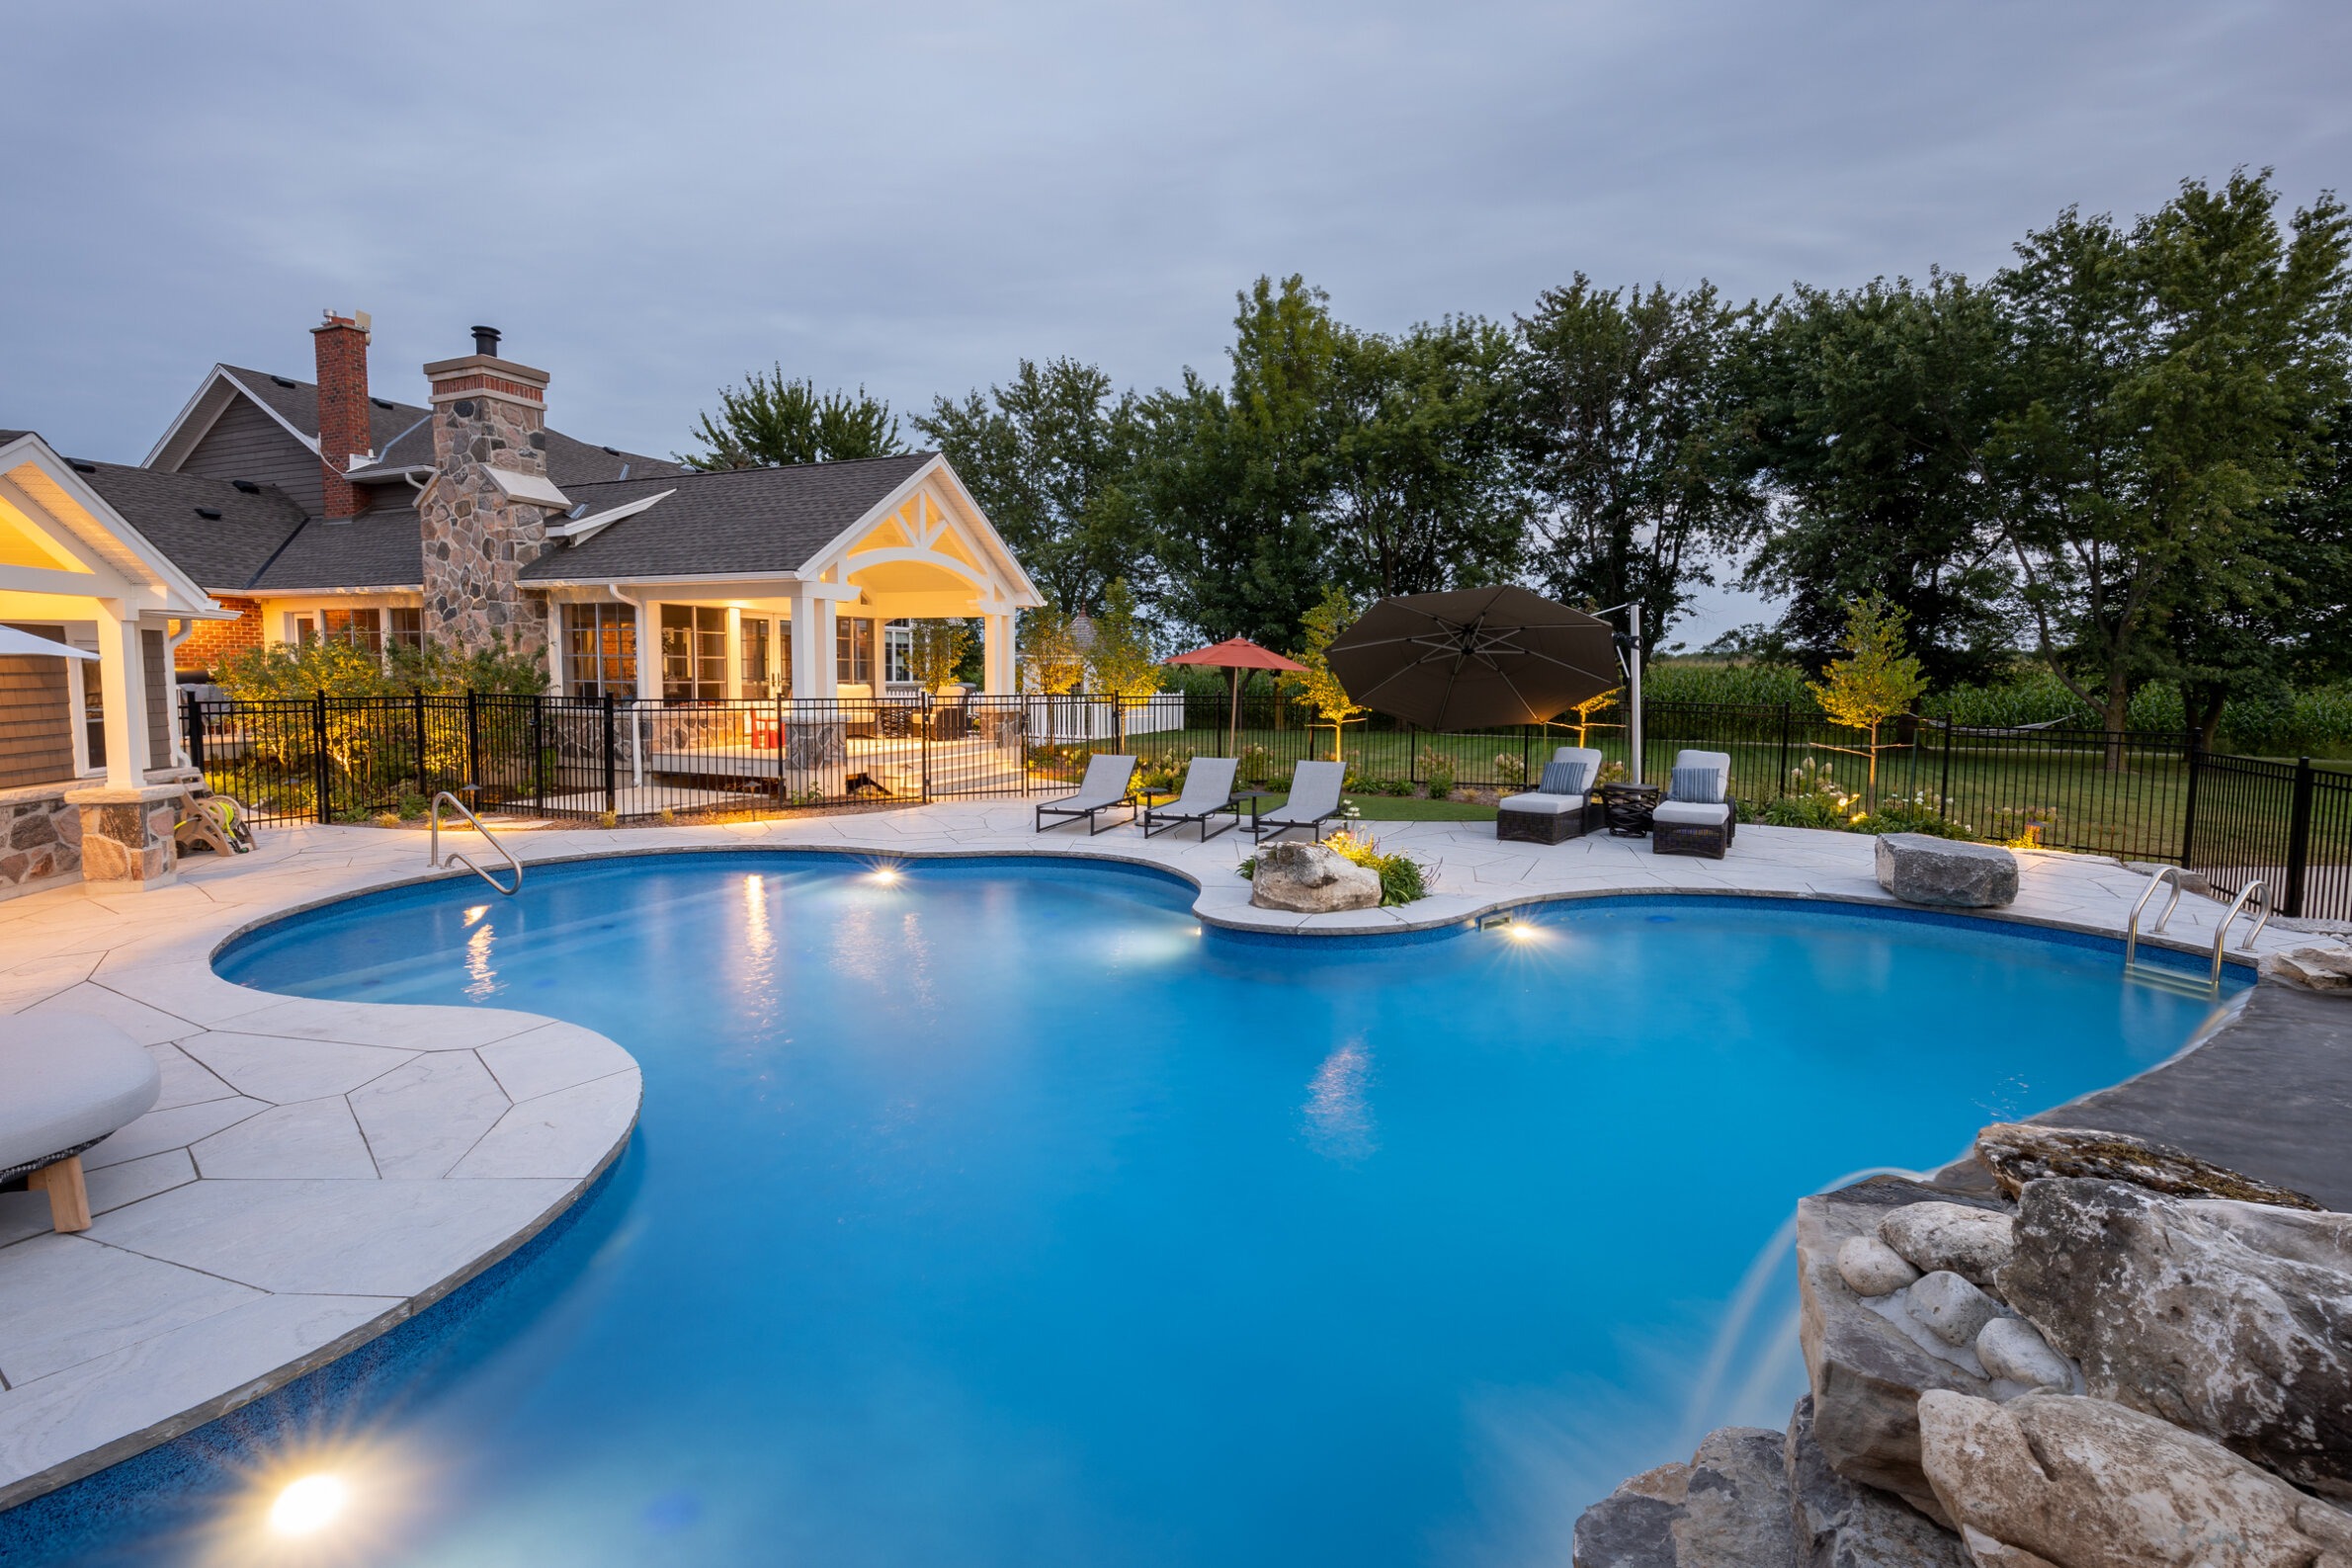 Luxurious backyard with a curved swimming pool at twilight, elegant house, patio area, loungers, umbrella, and landscaped garden. Warm lighting and clear sky.